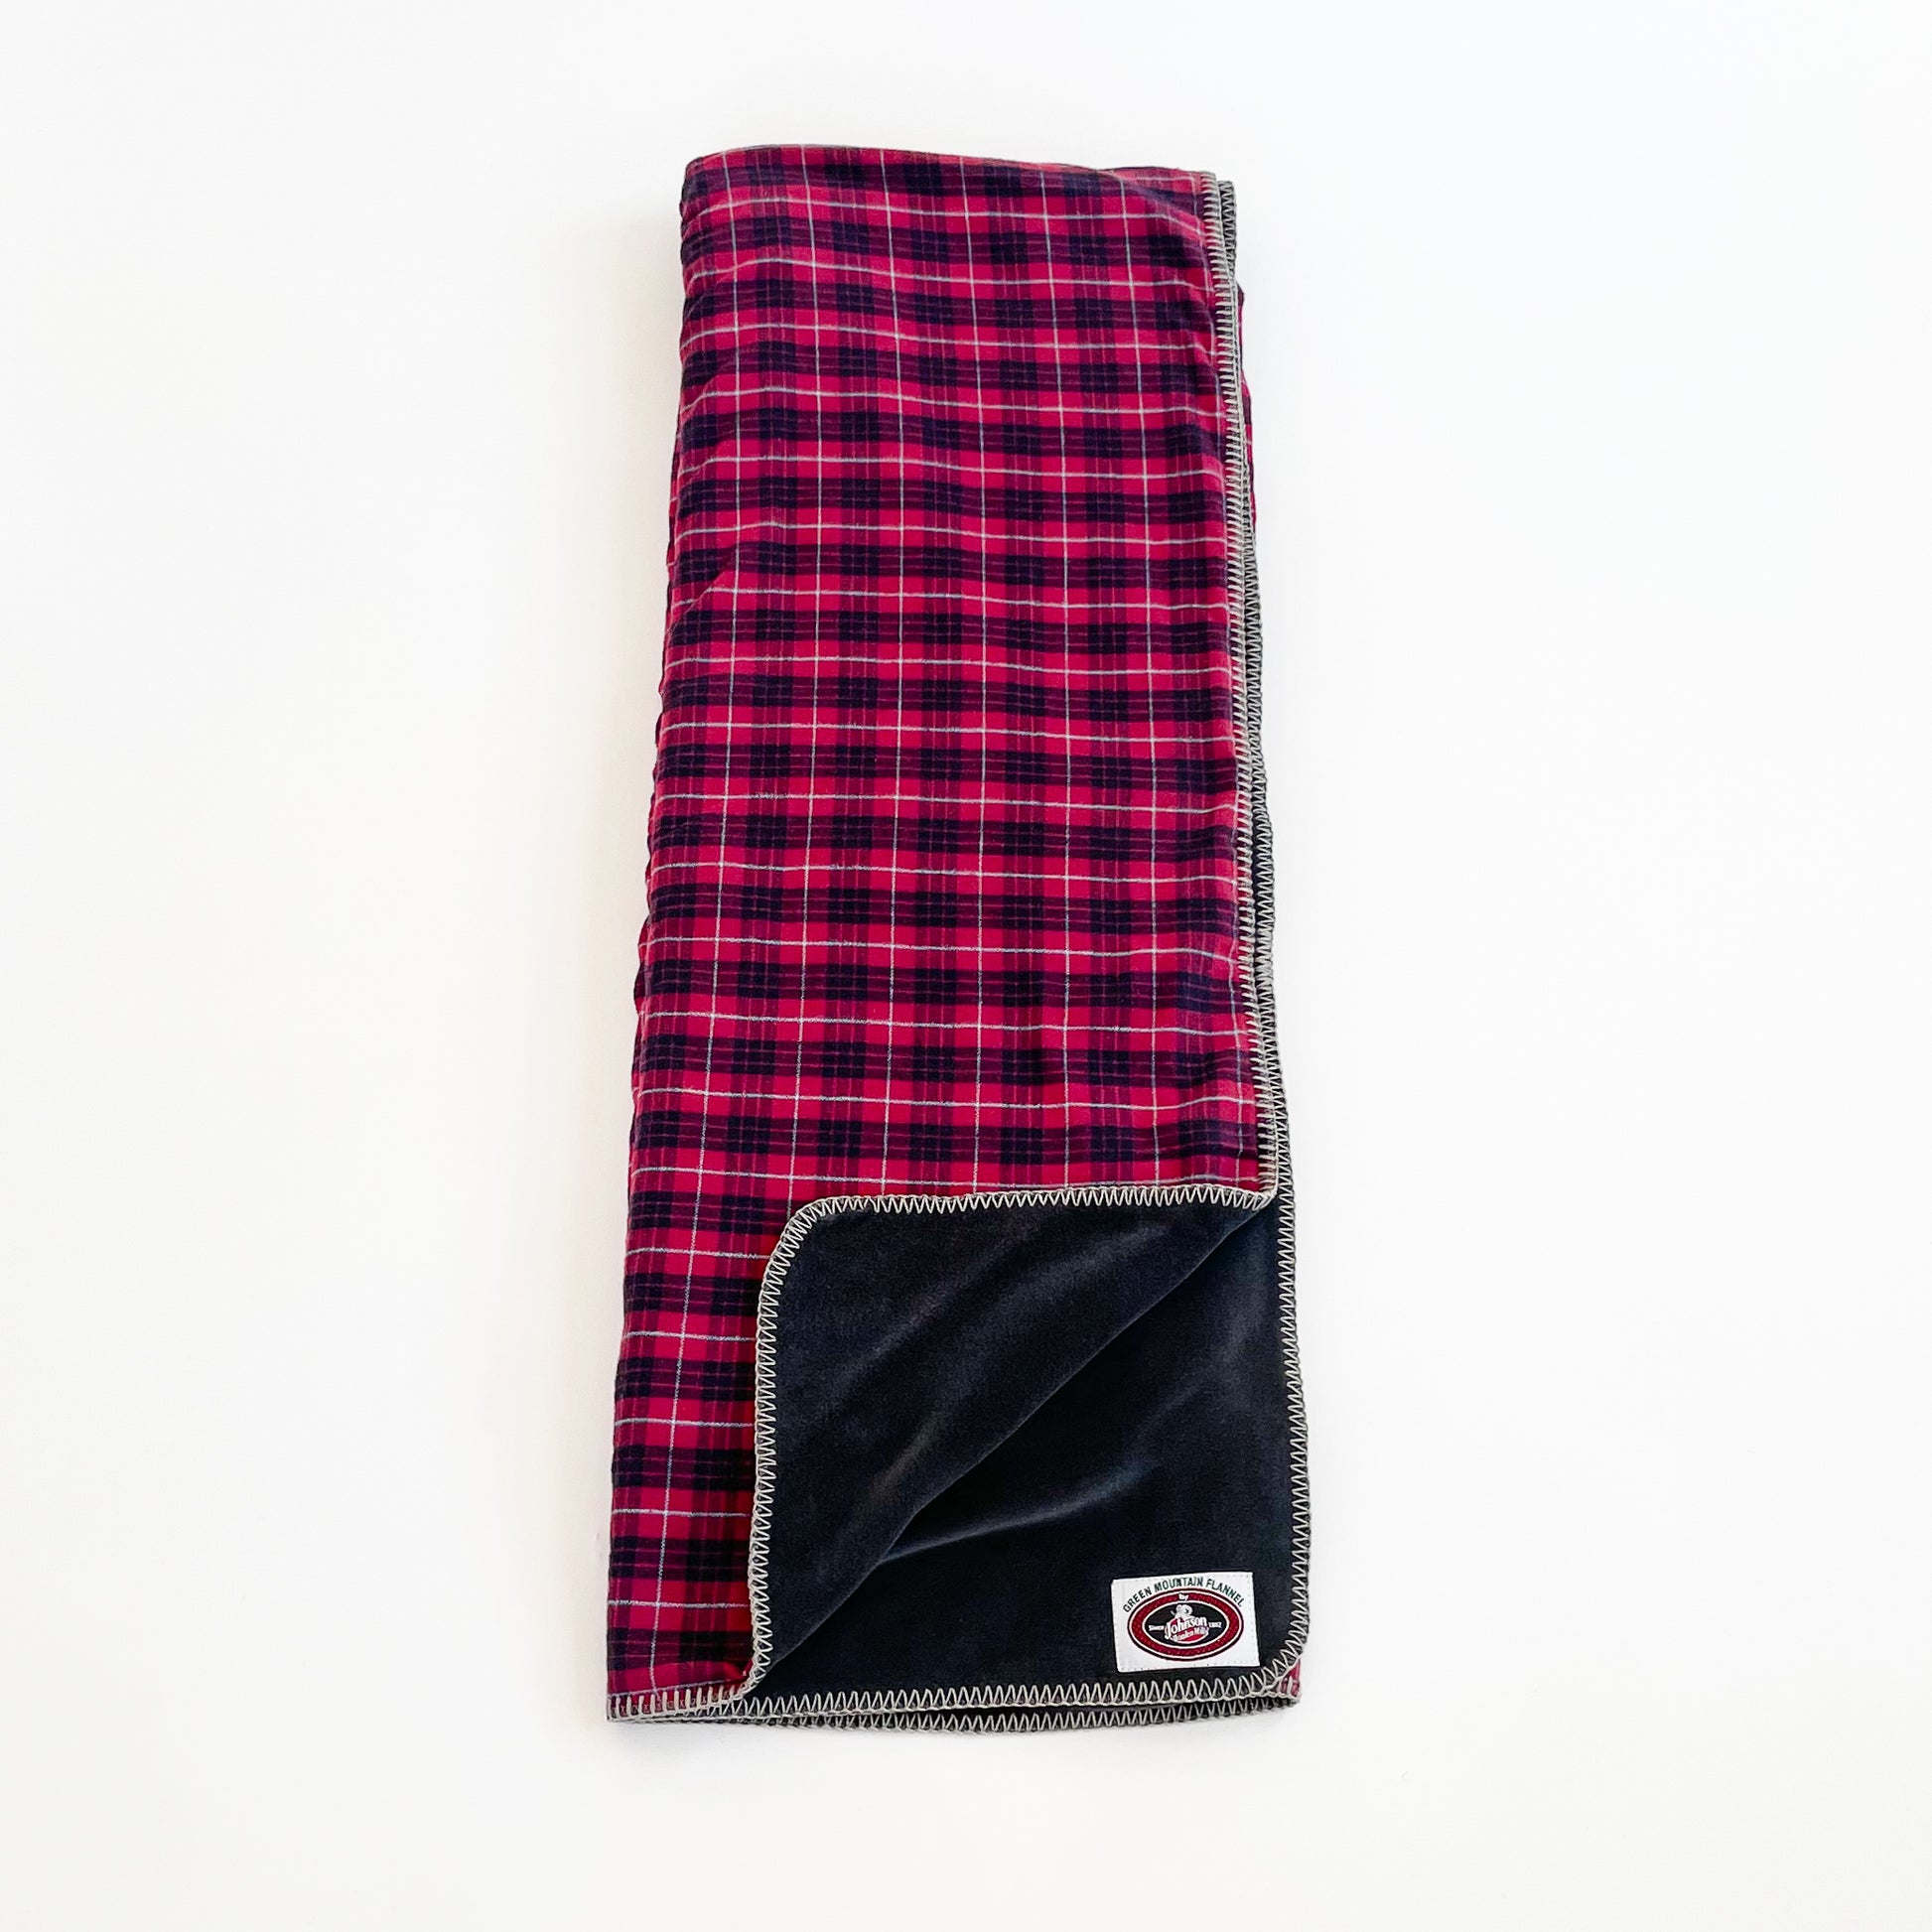 Red, black with white pinstripe plaid Flannel throw blanket laid out